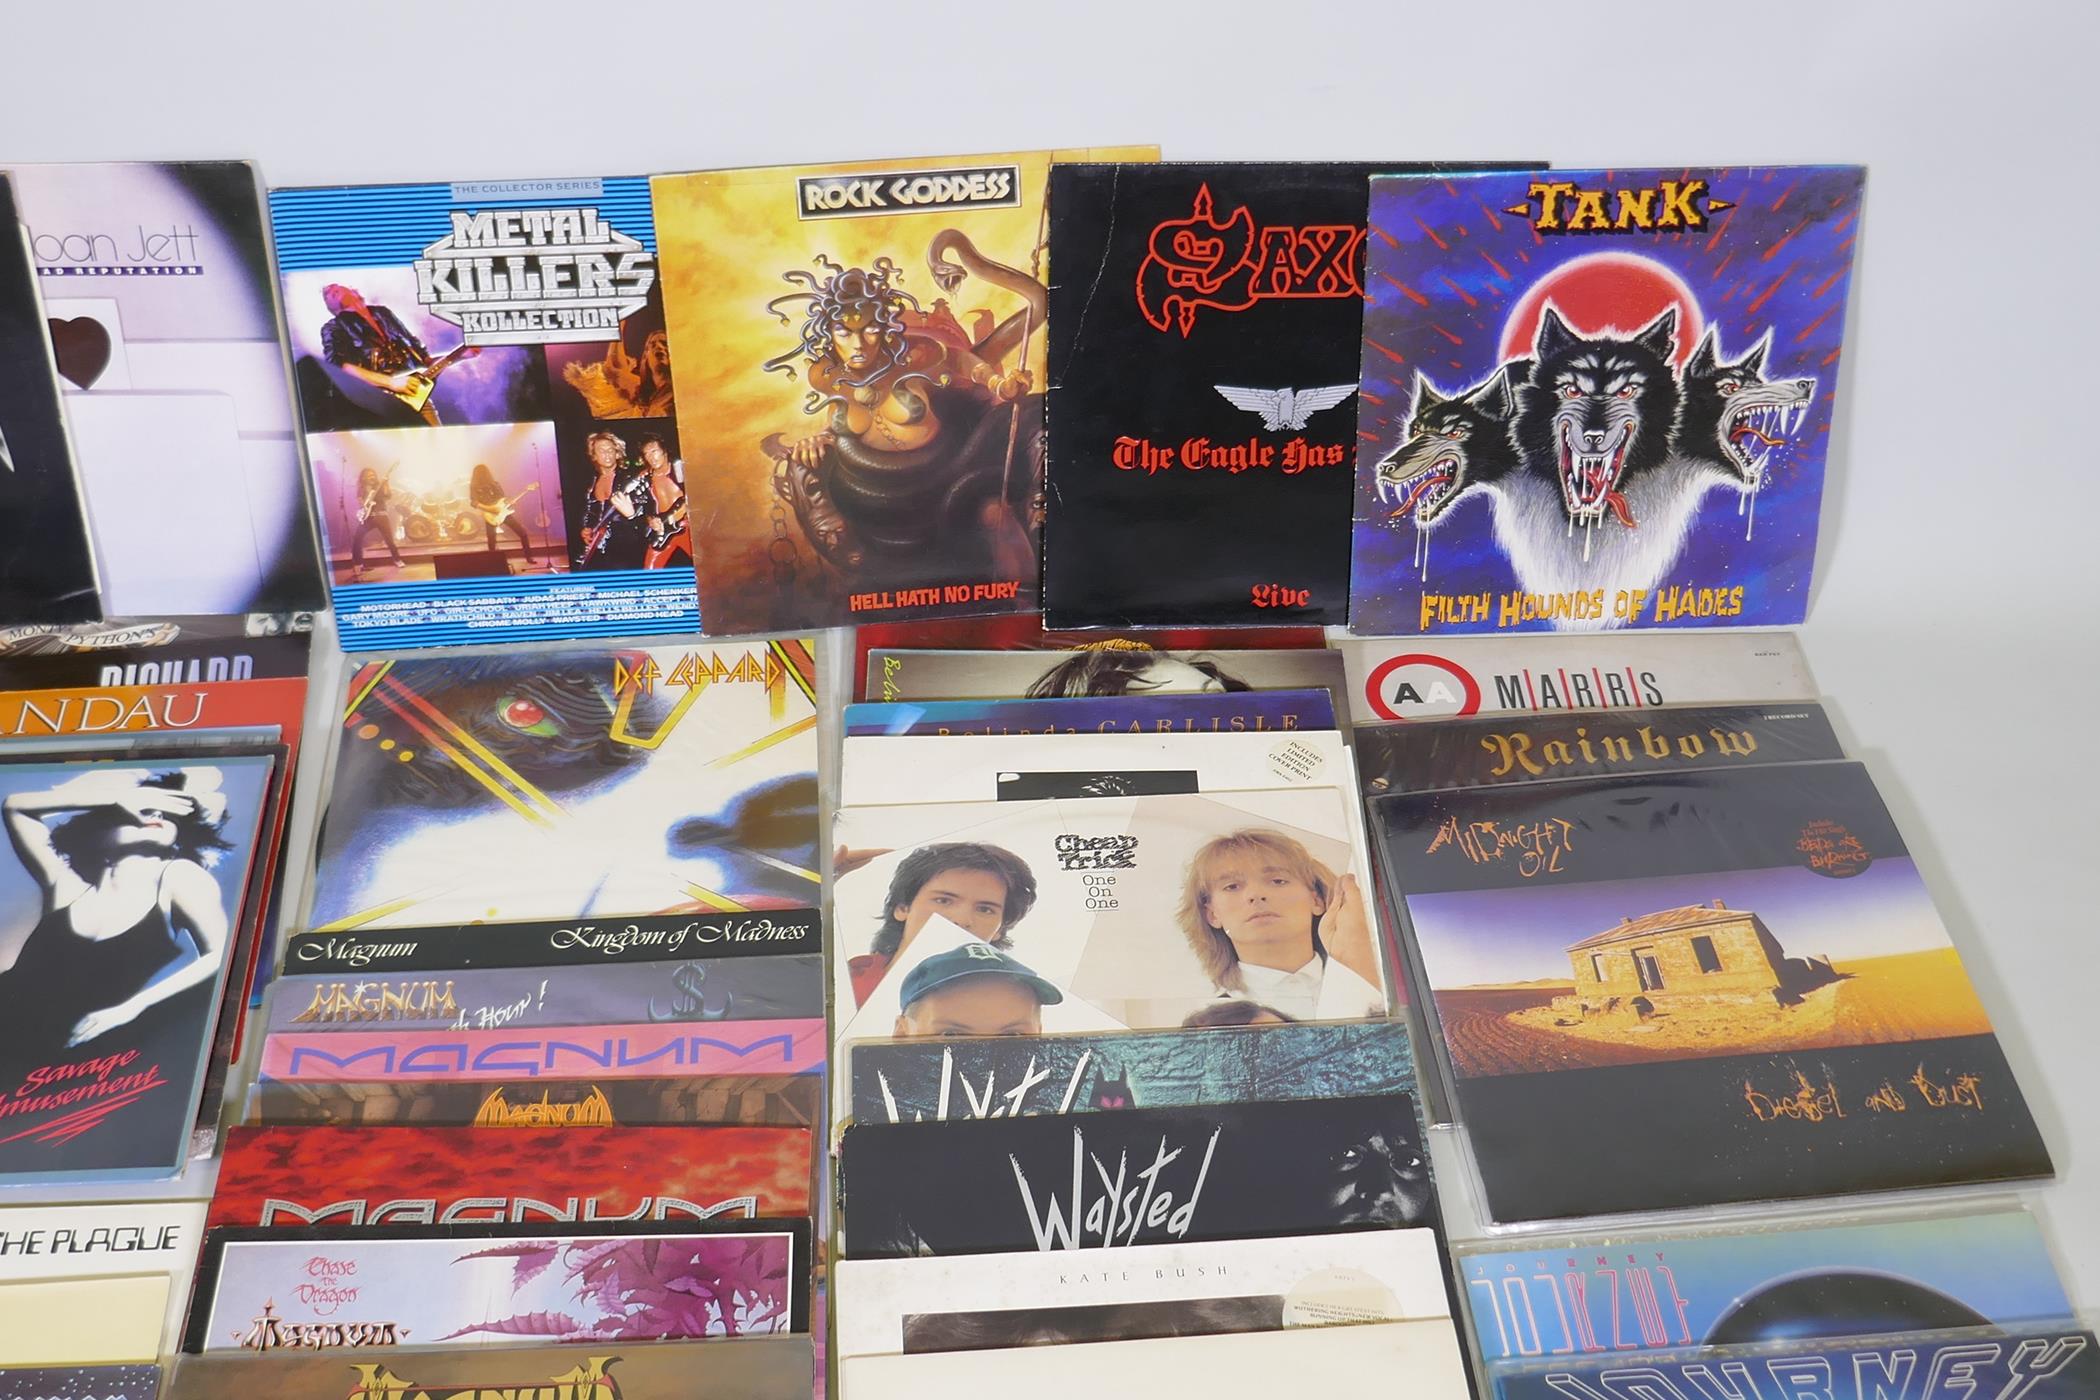 A quantity of 12" metal and rock vinyl LPs including Metallica, Meatloaf, Thin Lizzy, Motorhead, - Image 13 of 16